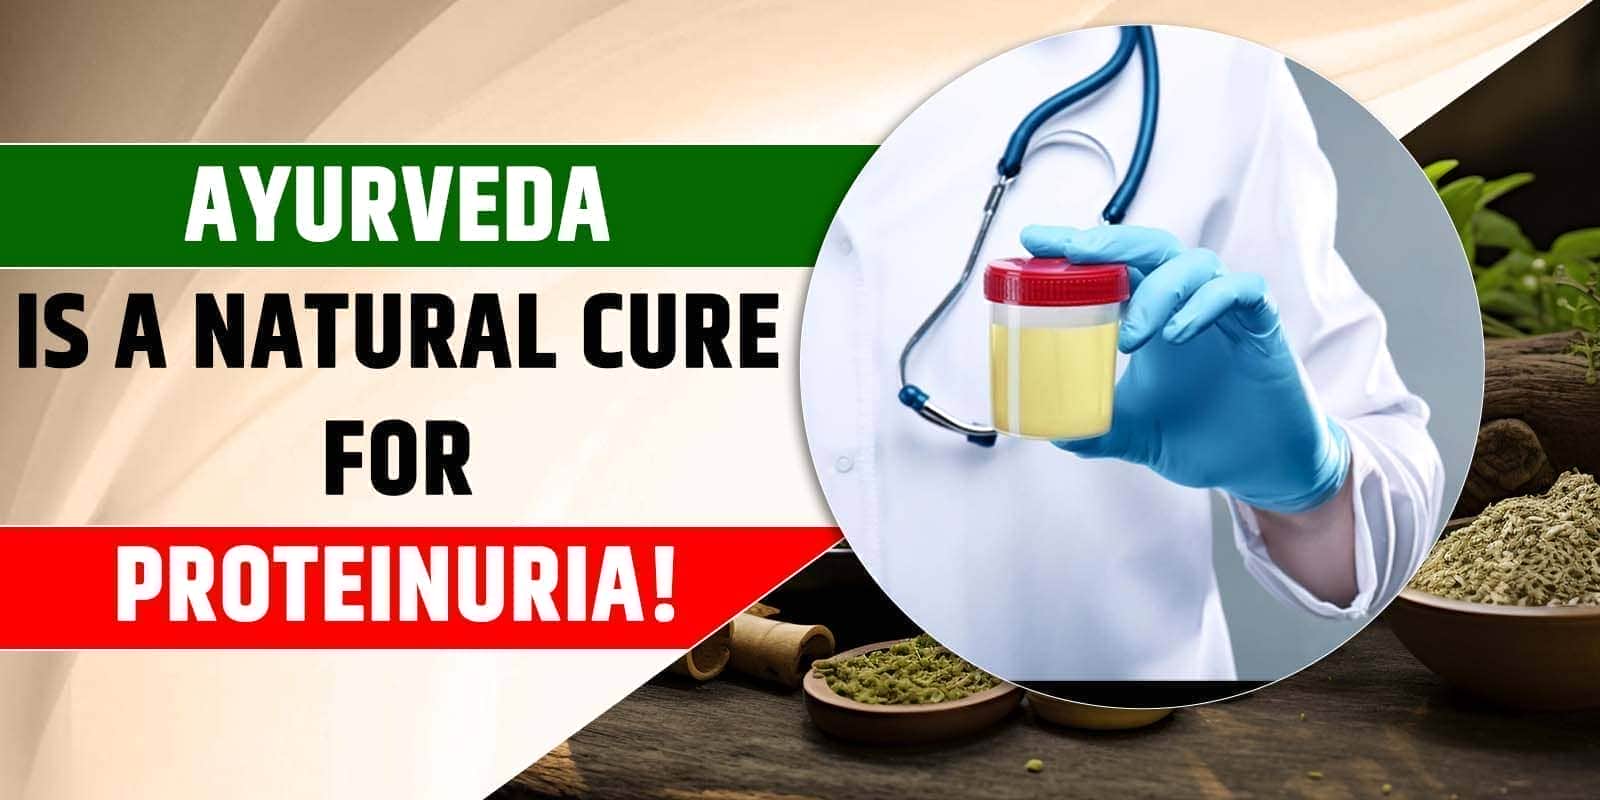 Ayurveda is a Natural Cure for Proteinuria!